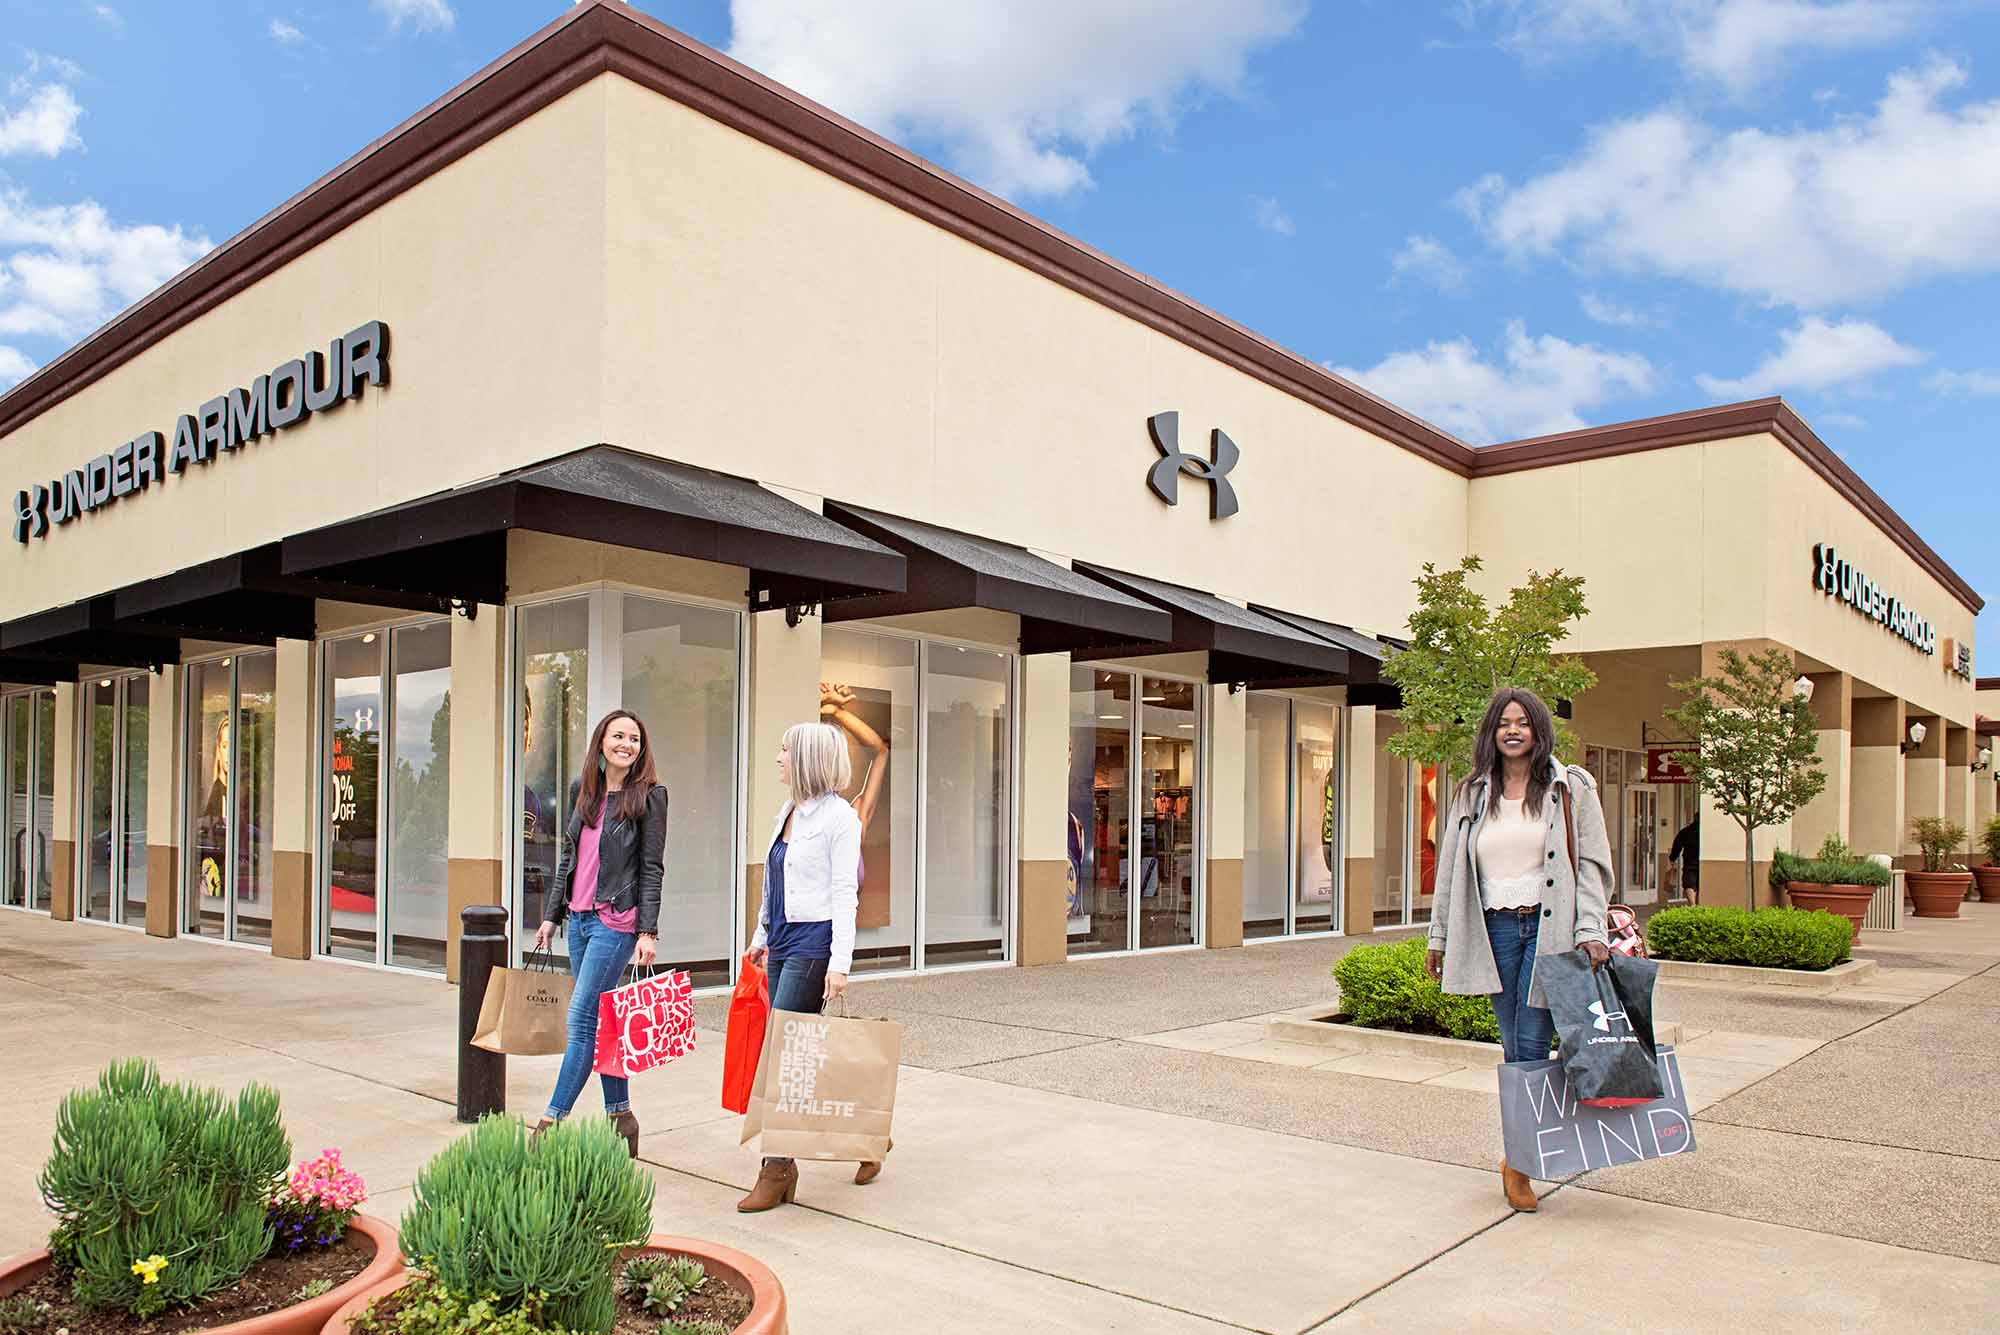 Folsom Premium Outlets - Outlet mall in California. Location & hours.